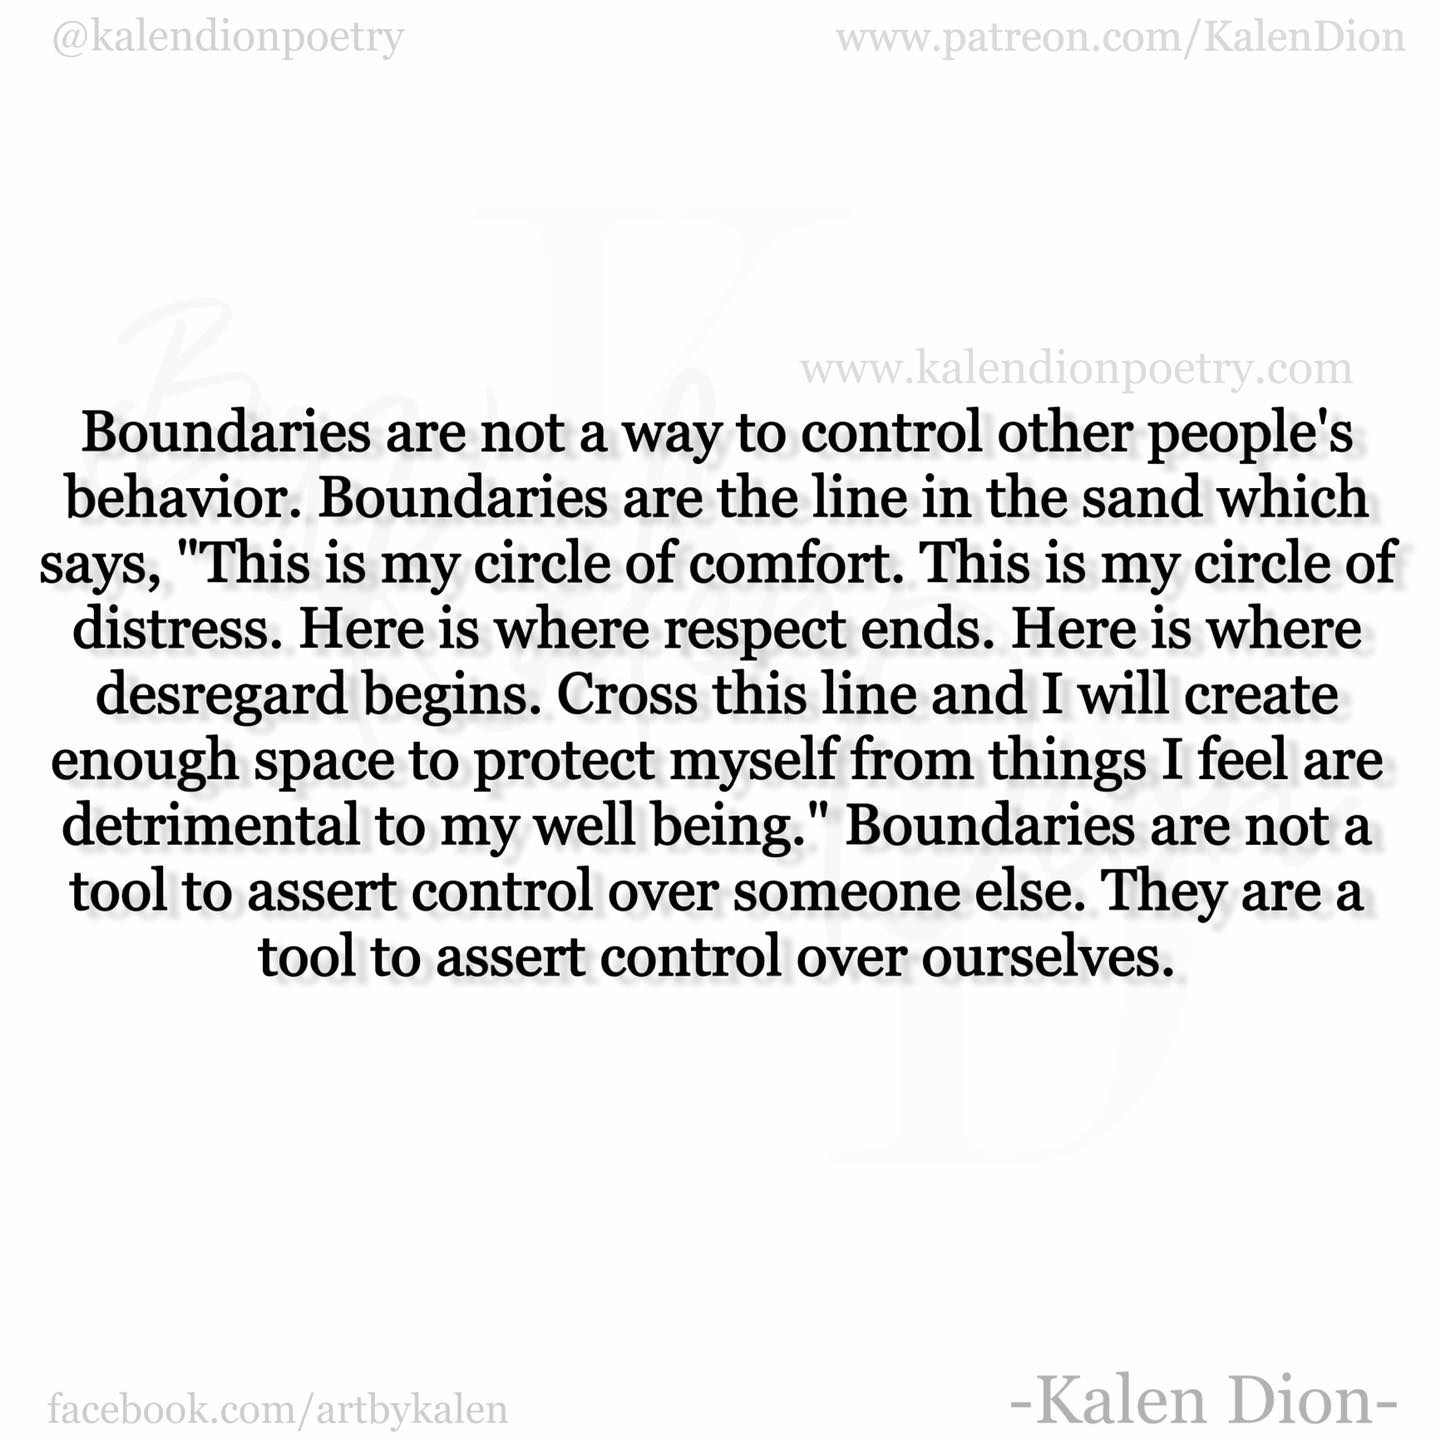 boundaries are a line in the sand that say, this is my circle of comfort, this is my circle of distress, here is where respect ends, boundaries are not a tool to exert control over someone else